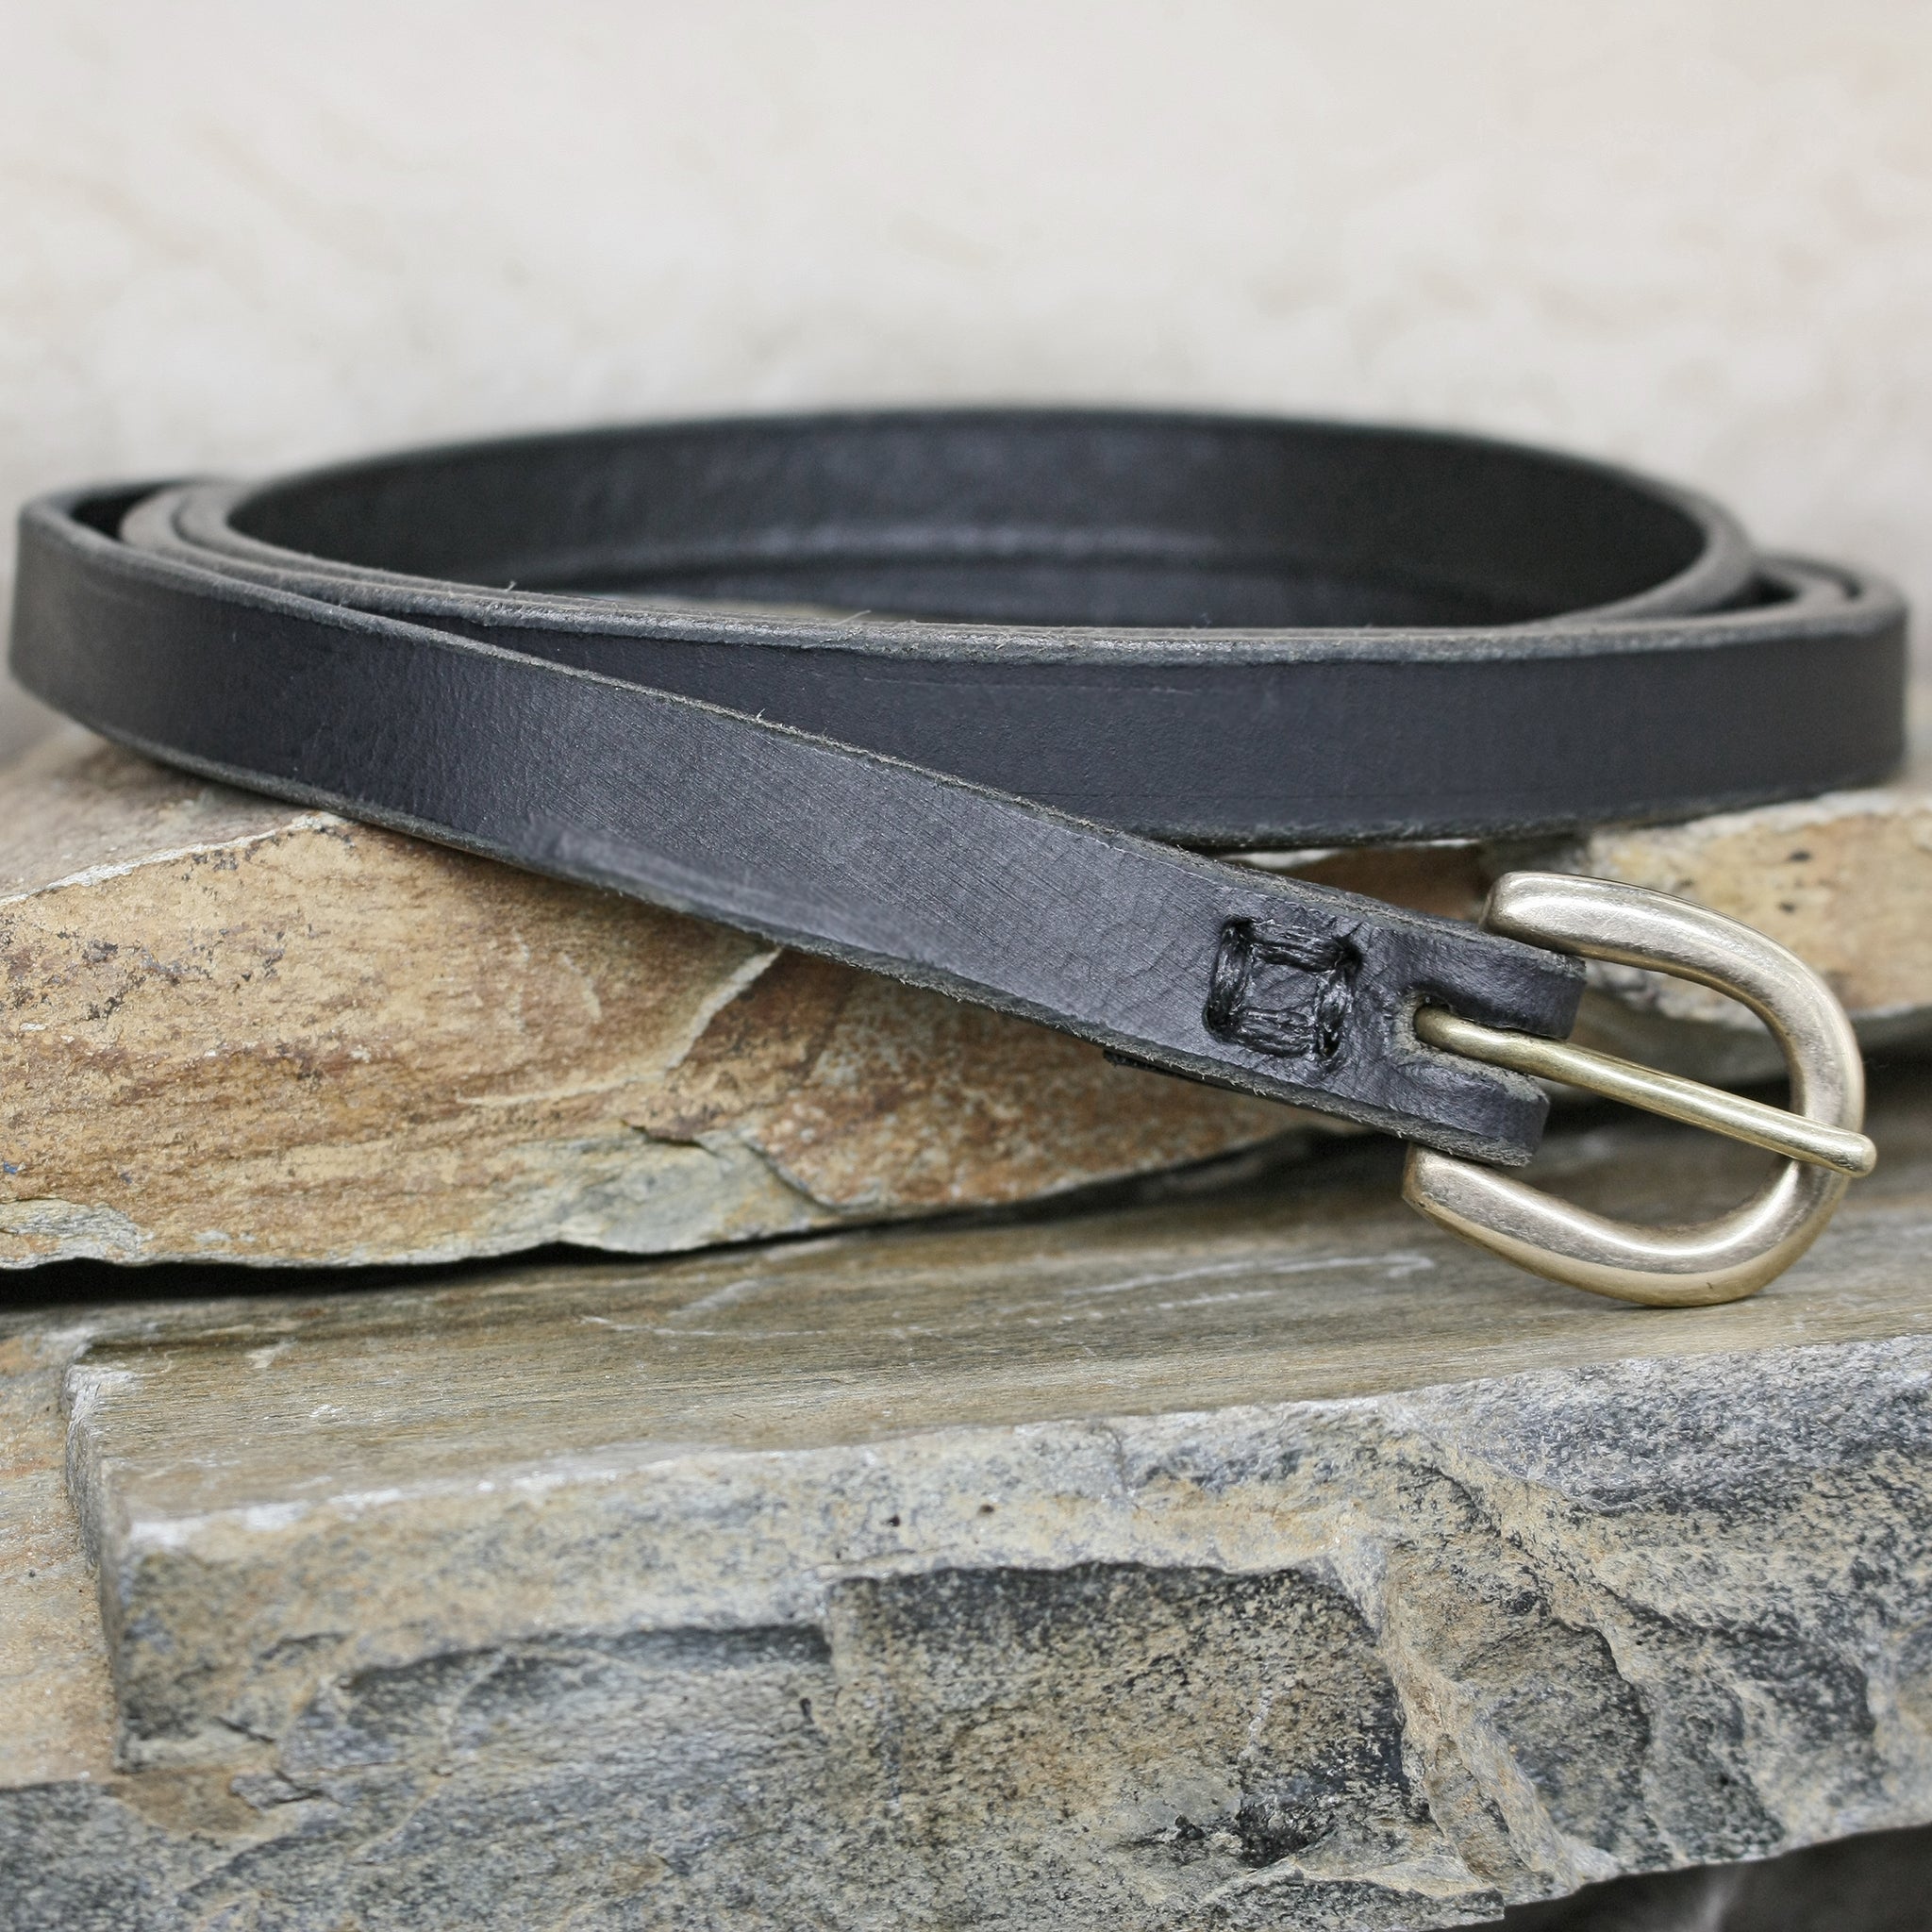 Black 12mm Wide Leather Viking Belt with Brass Buckle on Rock